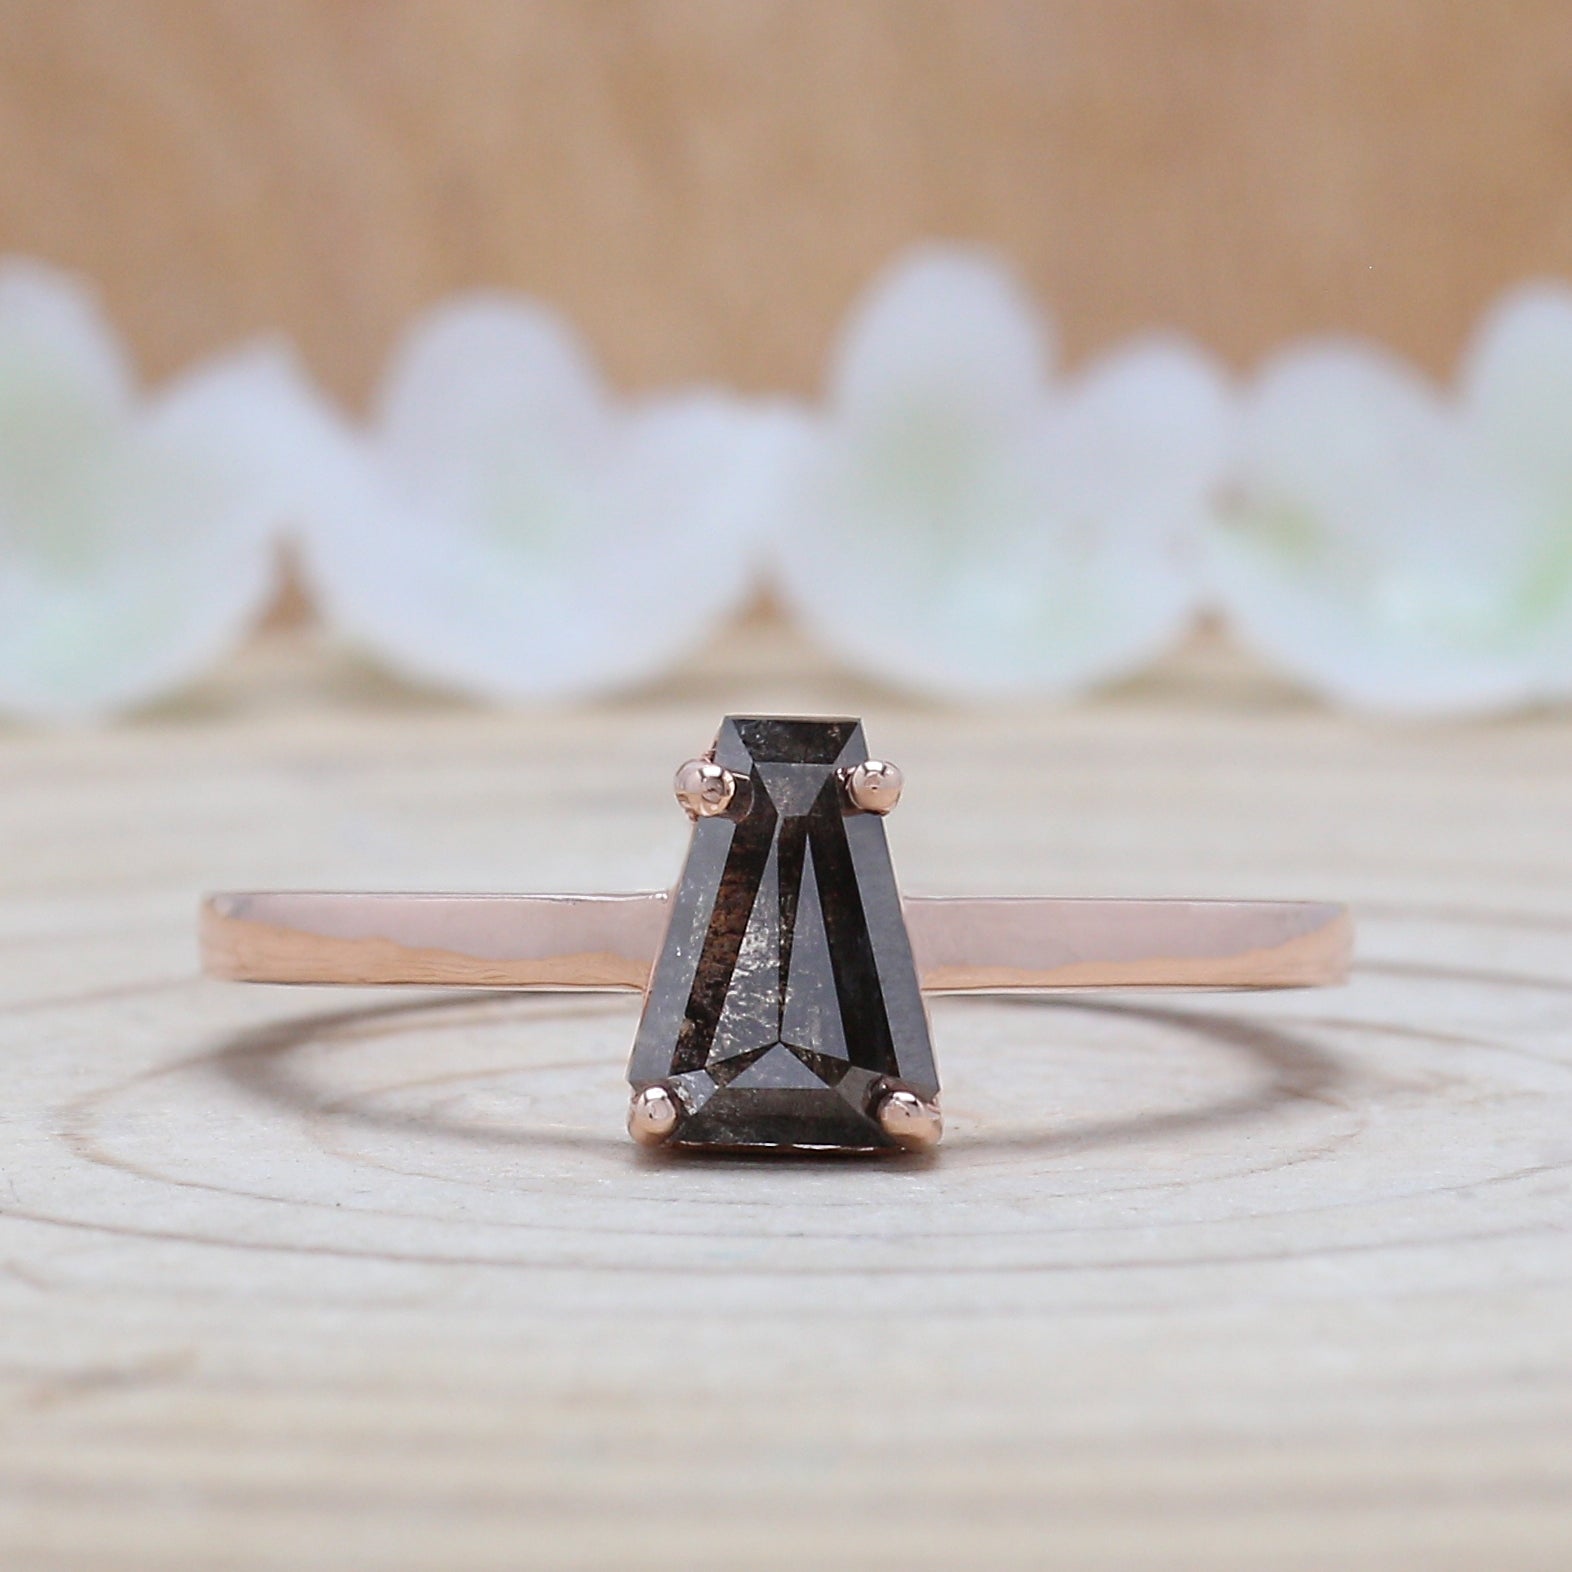 Coffin Cut Salt And Pepper Diamond Ring 0.73 Ct 7.15 MM Coffin Diamond Ring 14K Solid Rose Gold Silver Engagement Ring Gift For Her QL1297